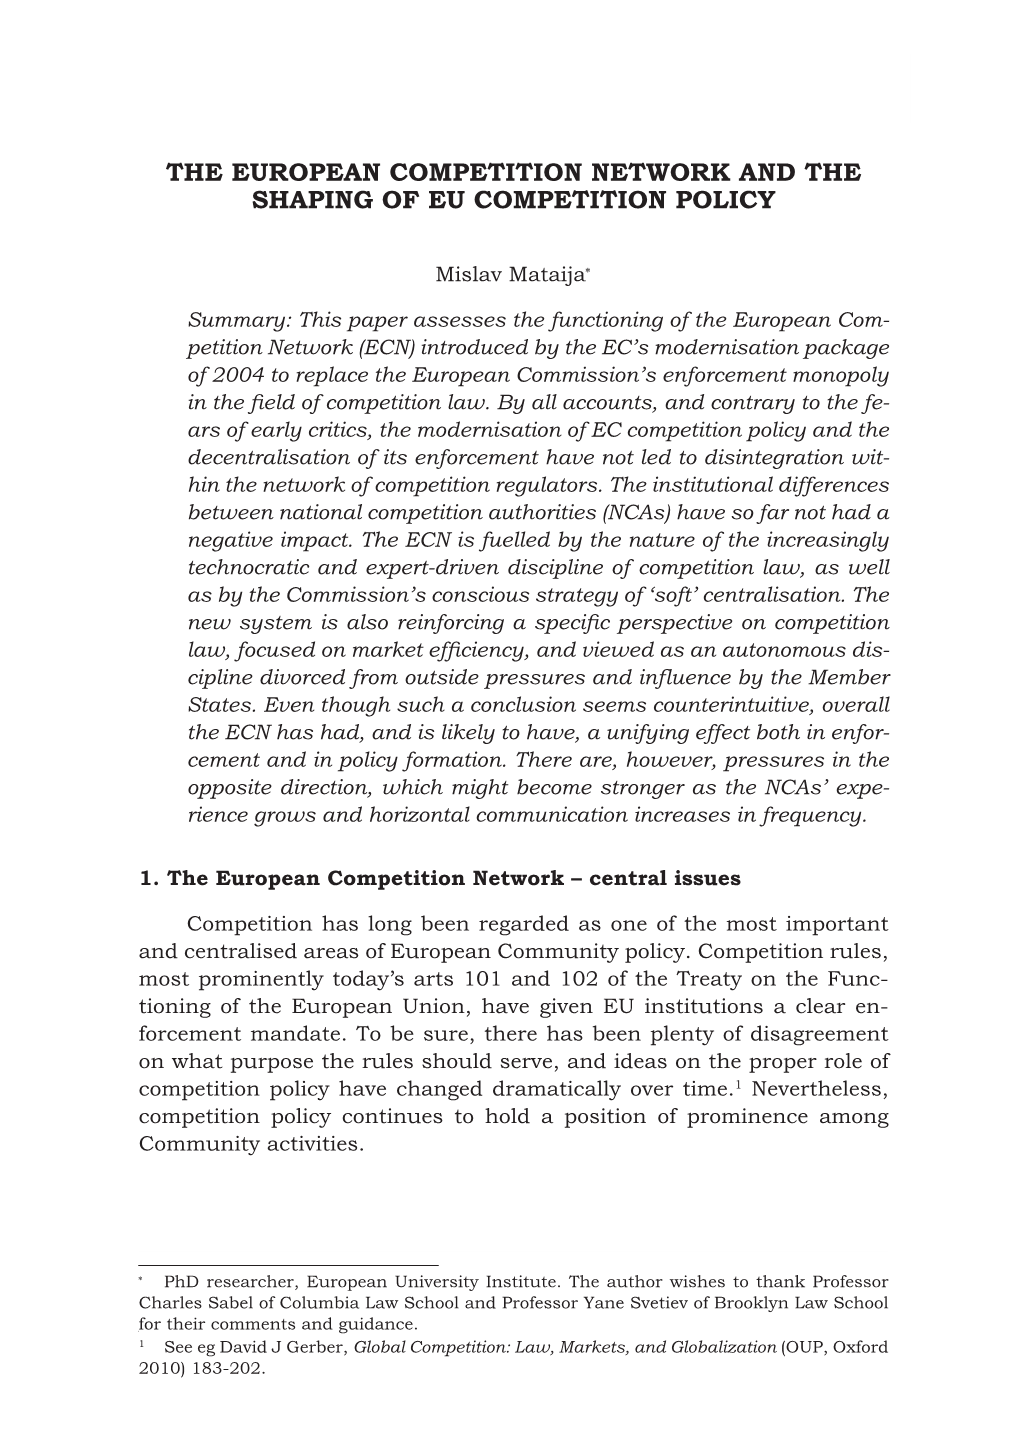 The European Competition Network and the Shaping of Eu Competition Policy